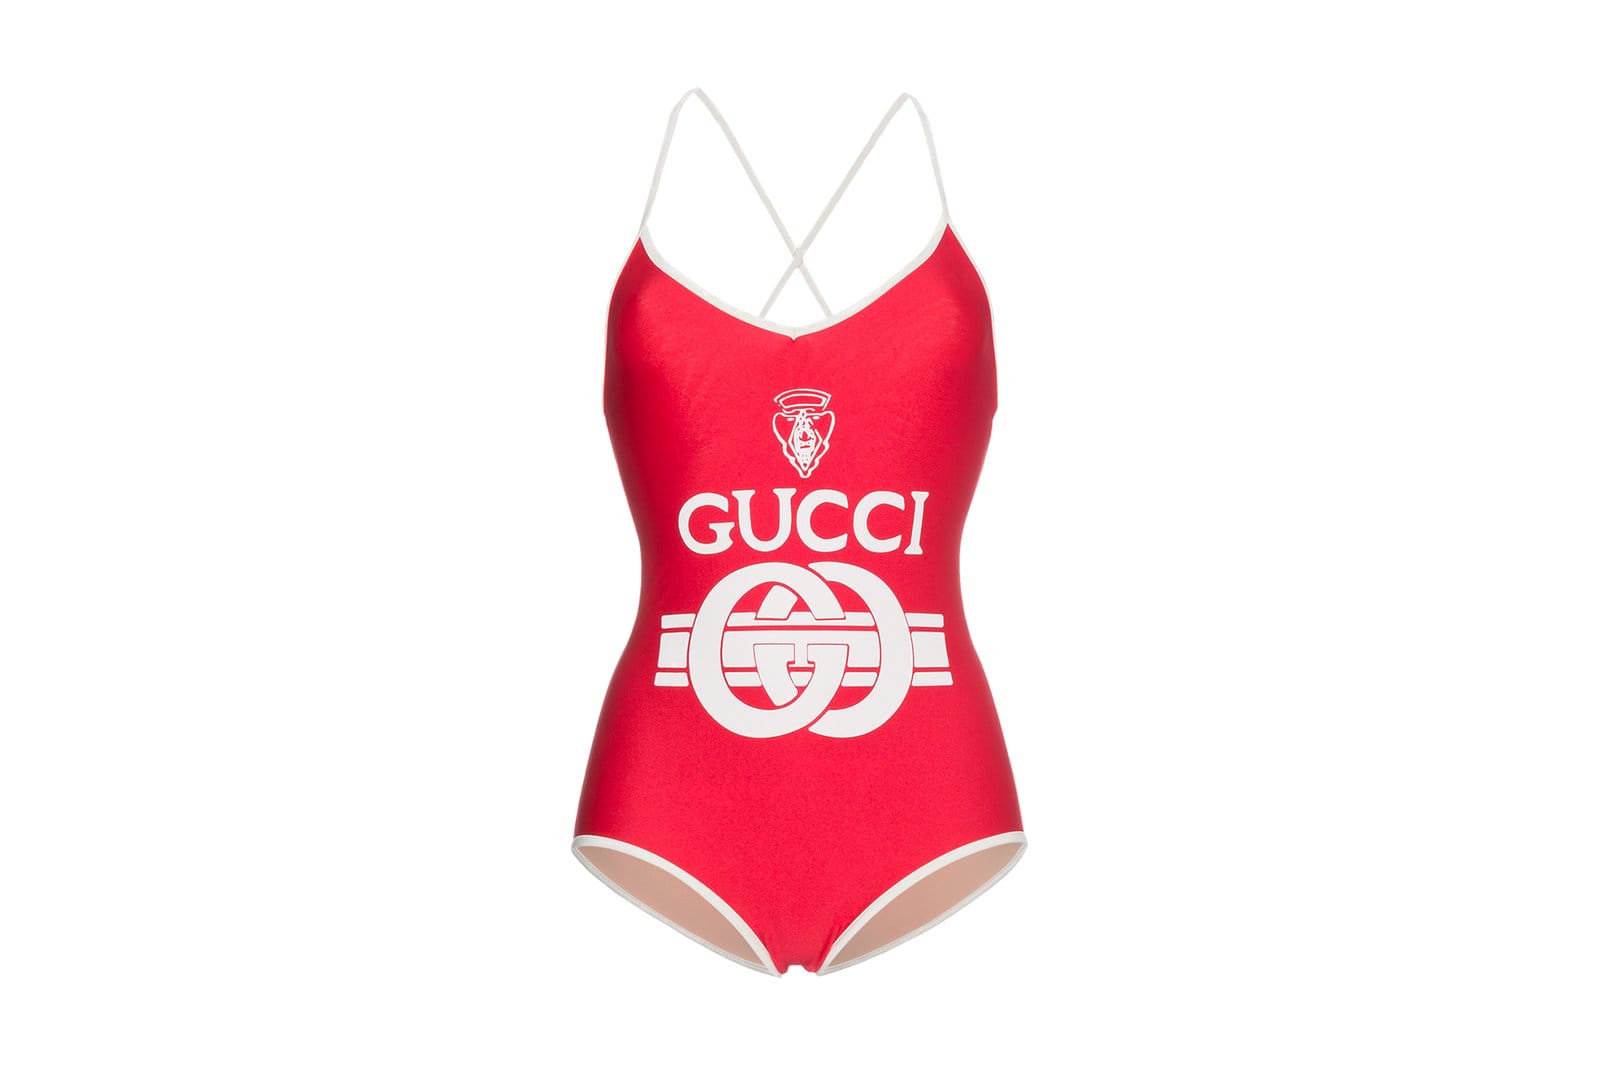 gucci red bathing suit